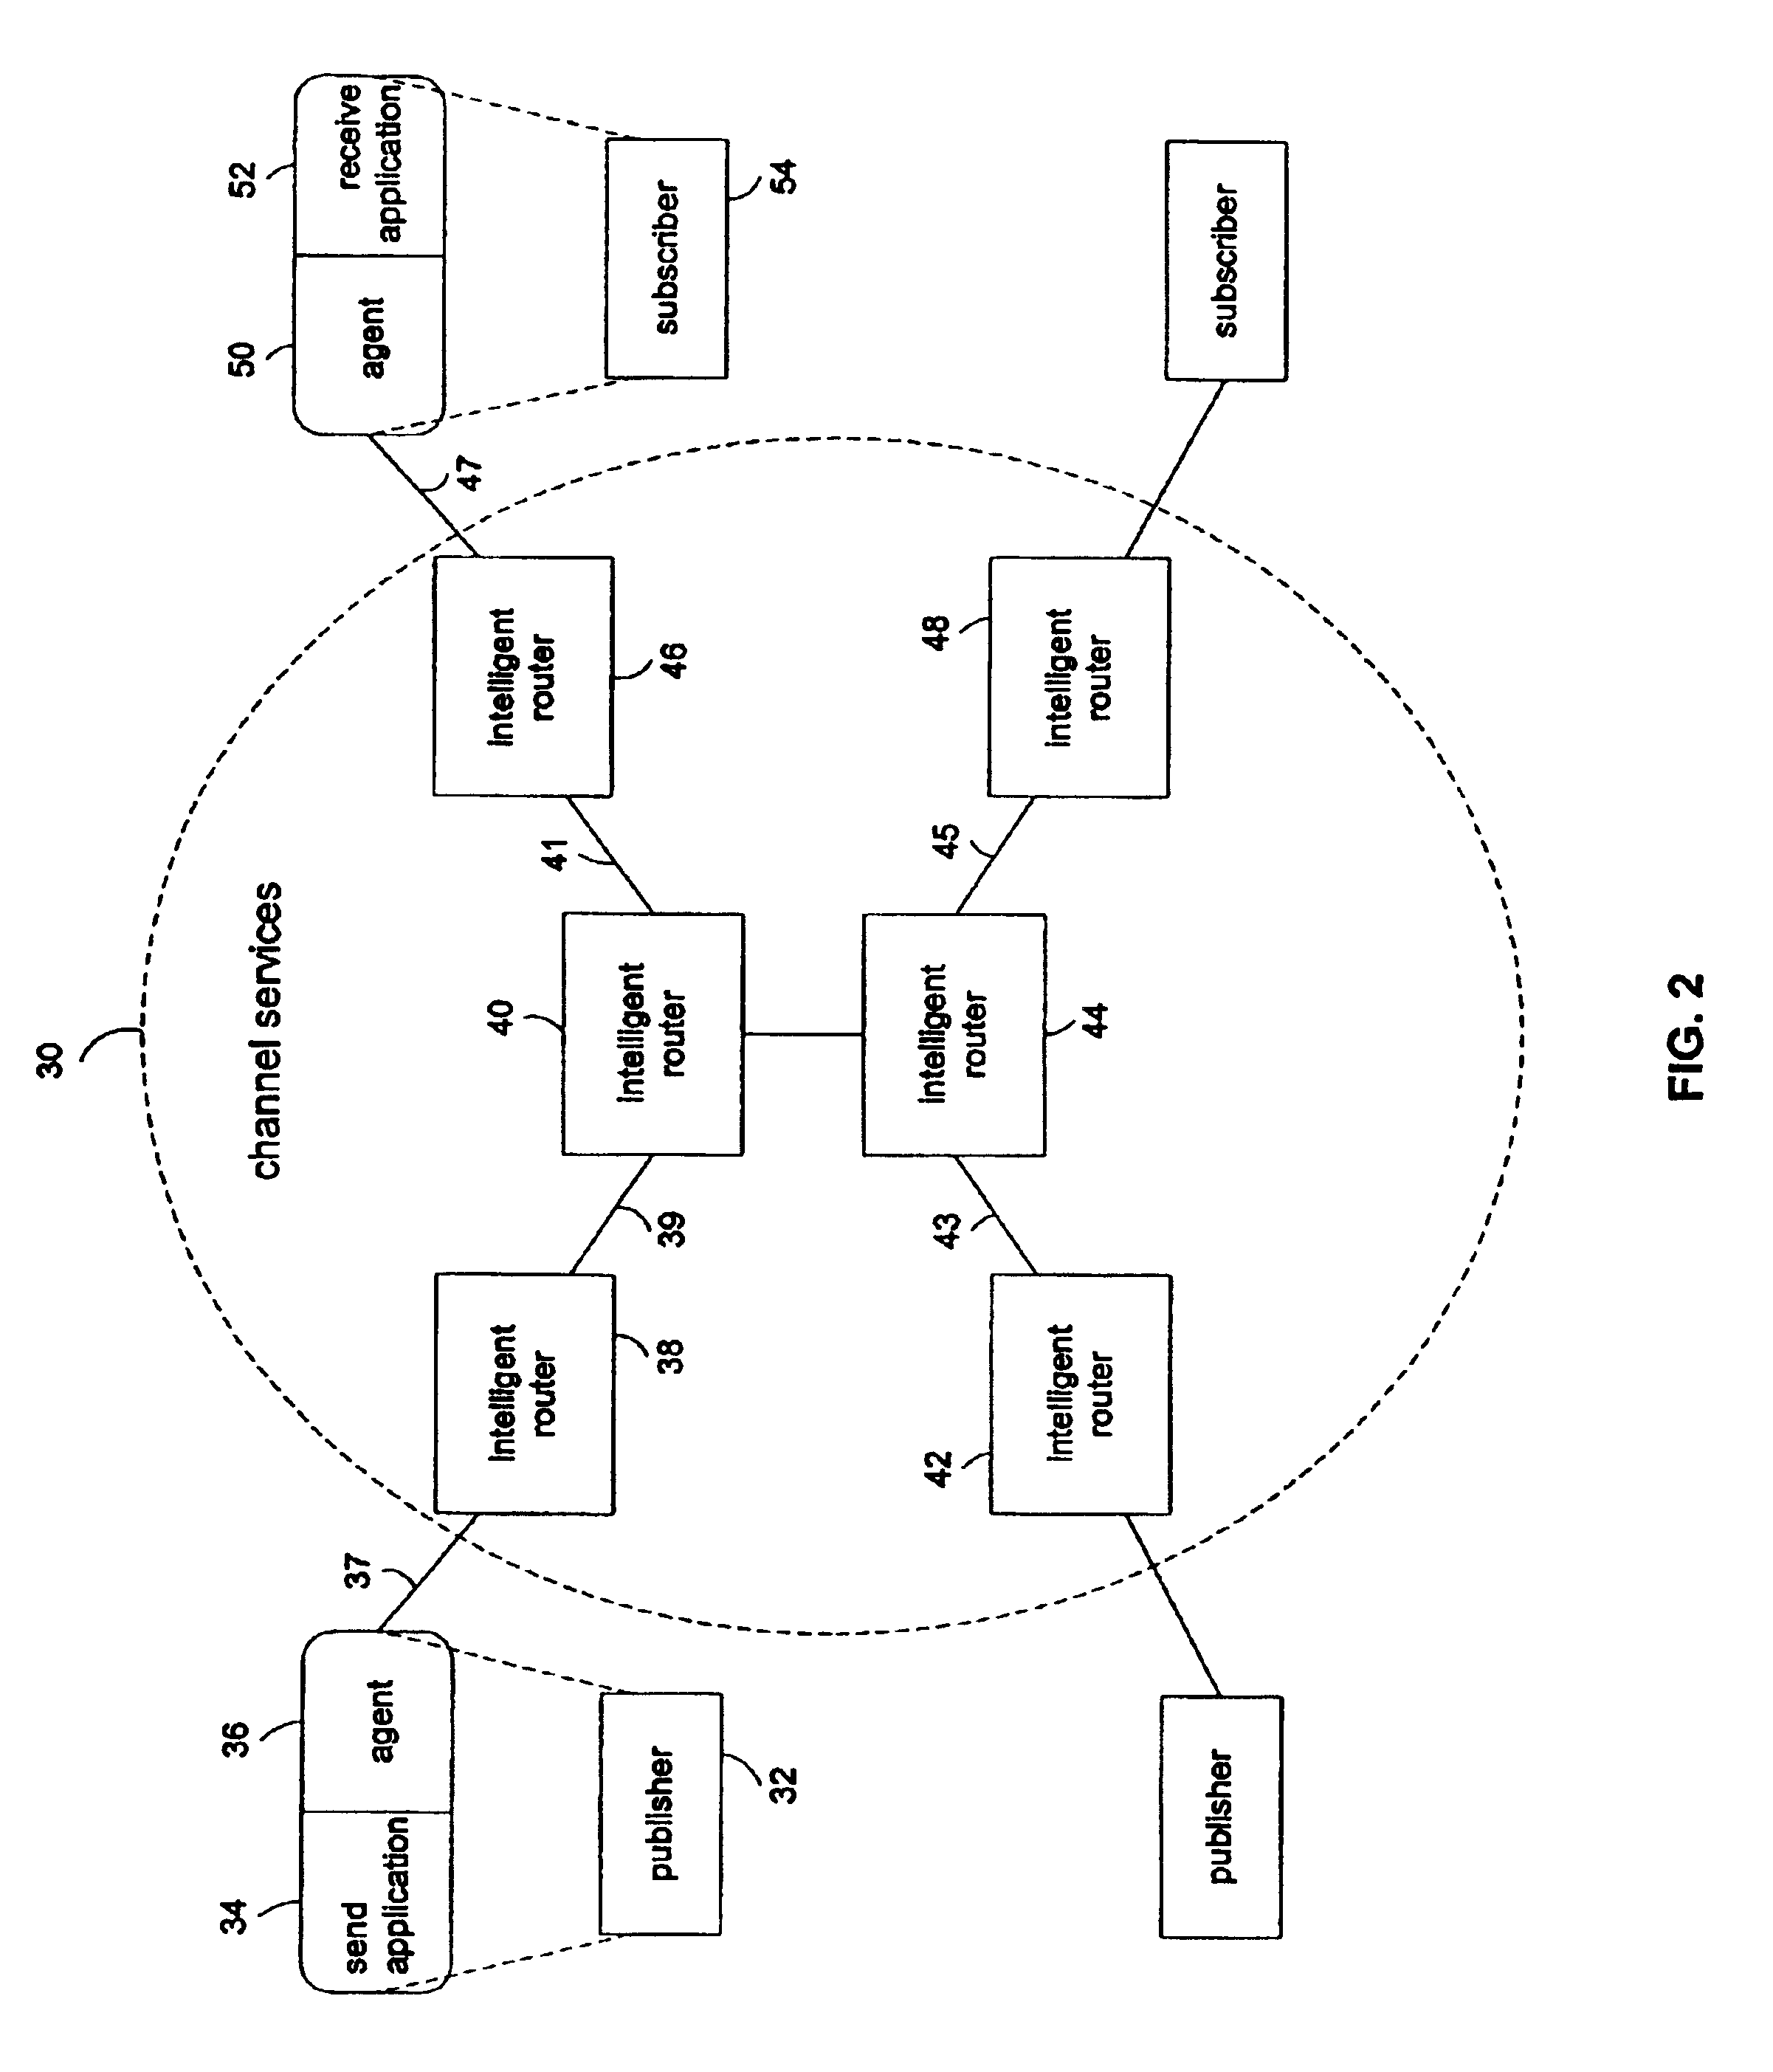 Method for storing Boolean functions to enable evaluation, modification, reuse, and delivery over a network